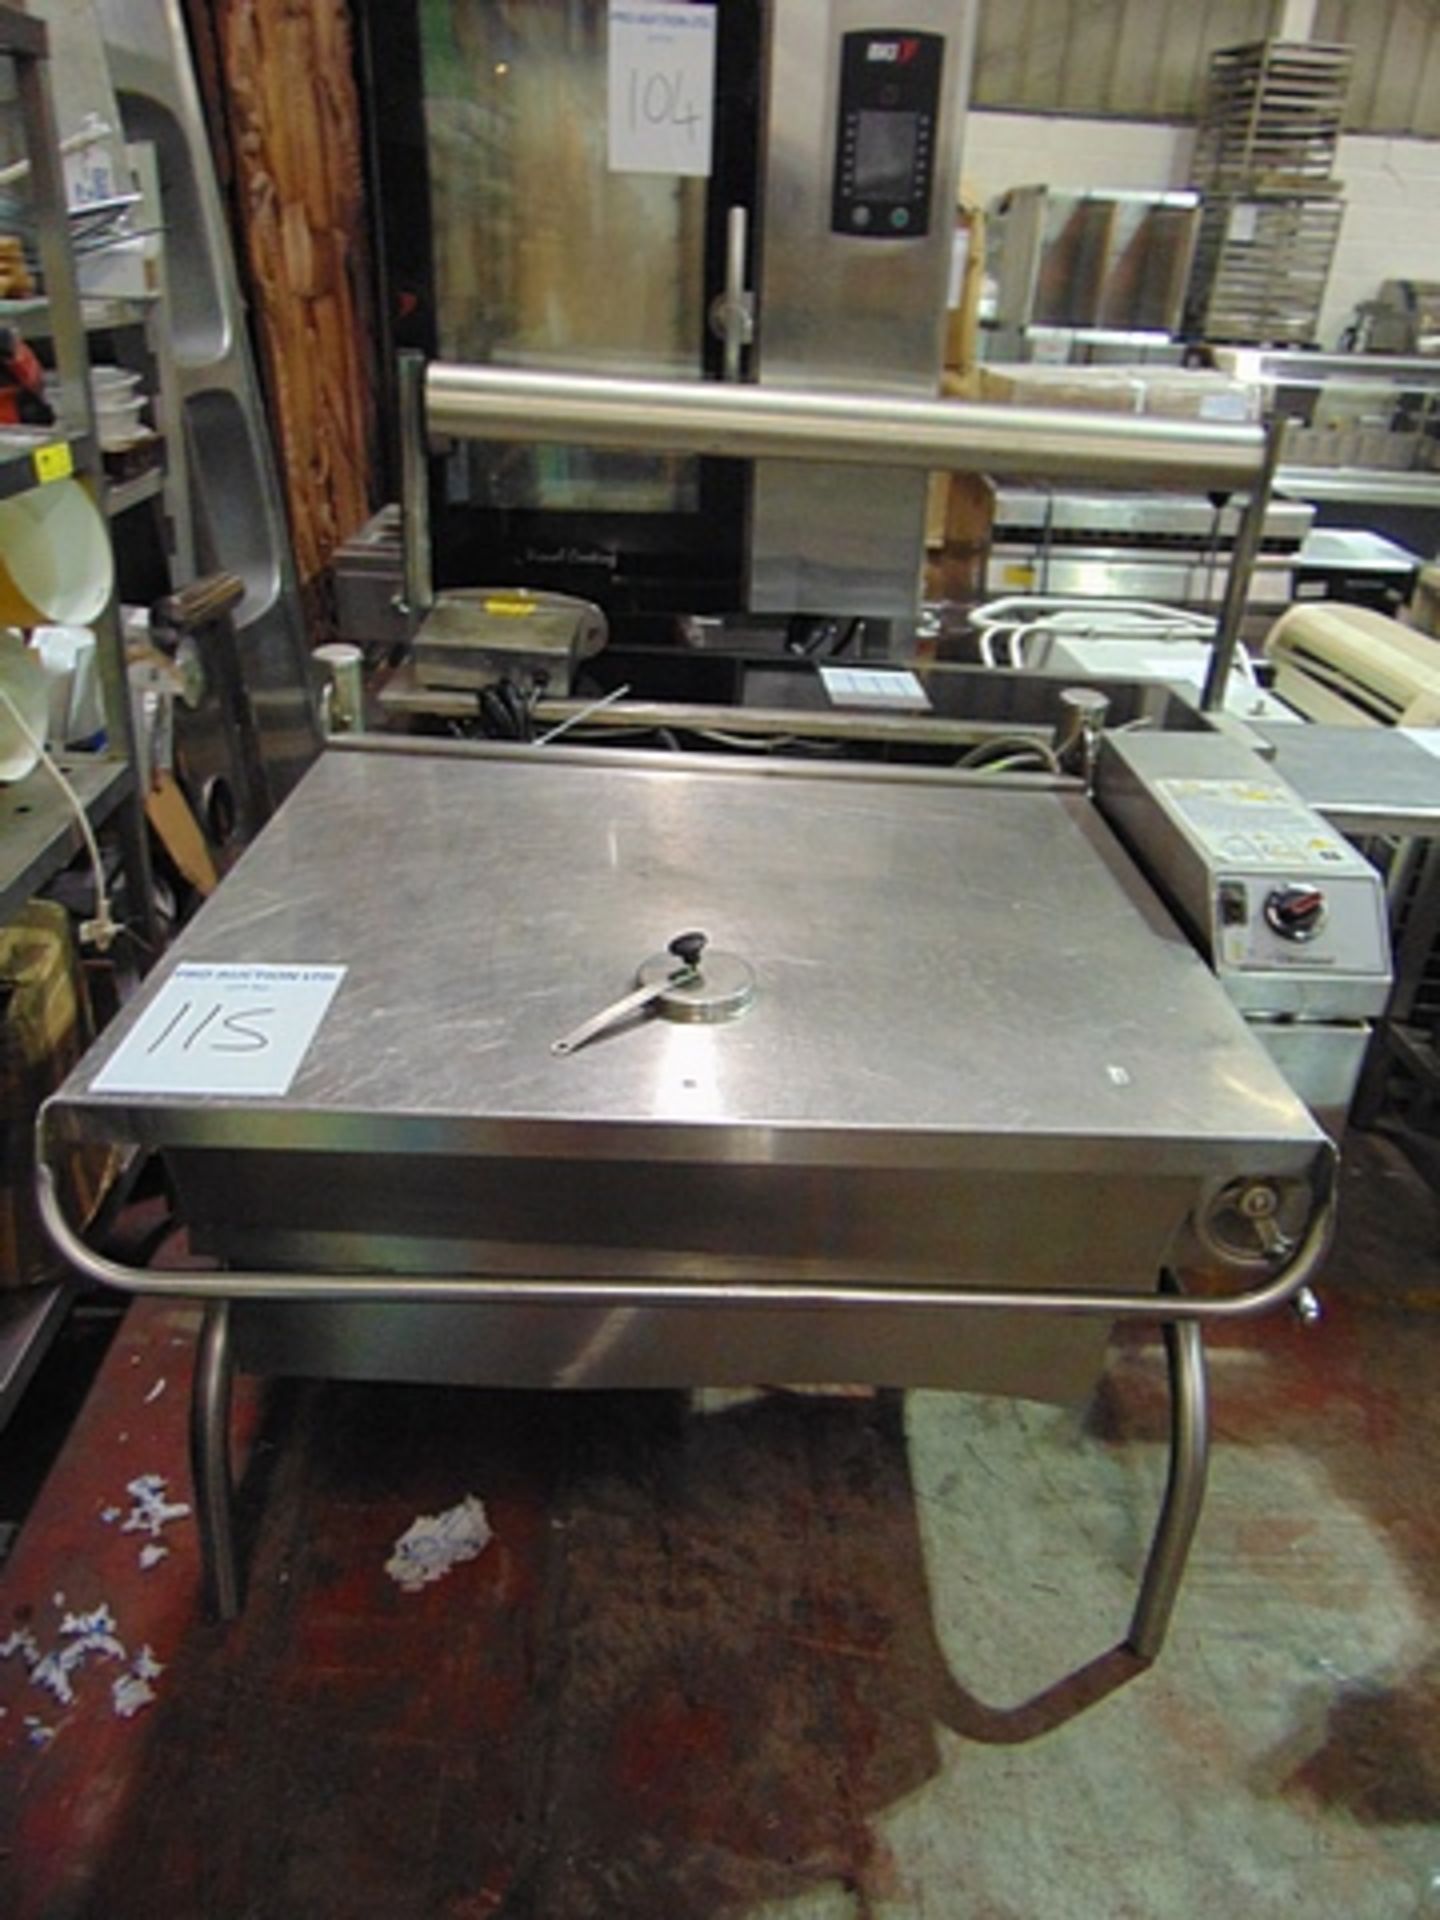 Cleveland SEL-40 40 Gallon DuraPan Electric Open Base Tilt Skillet - 18 kW With the 40 gallon